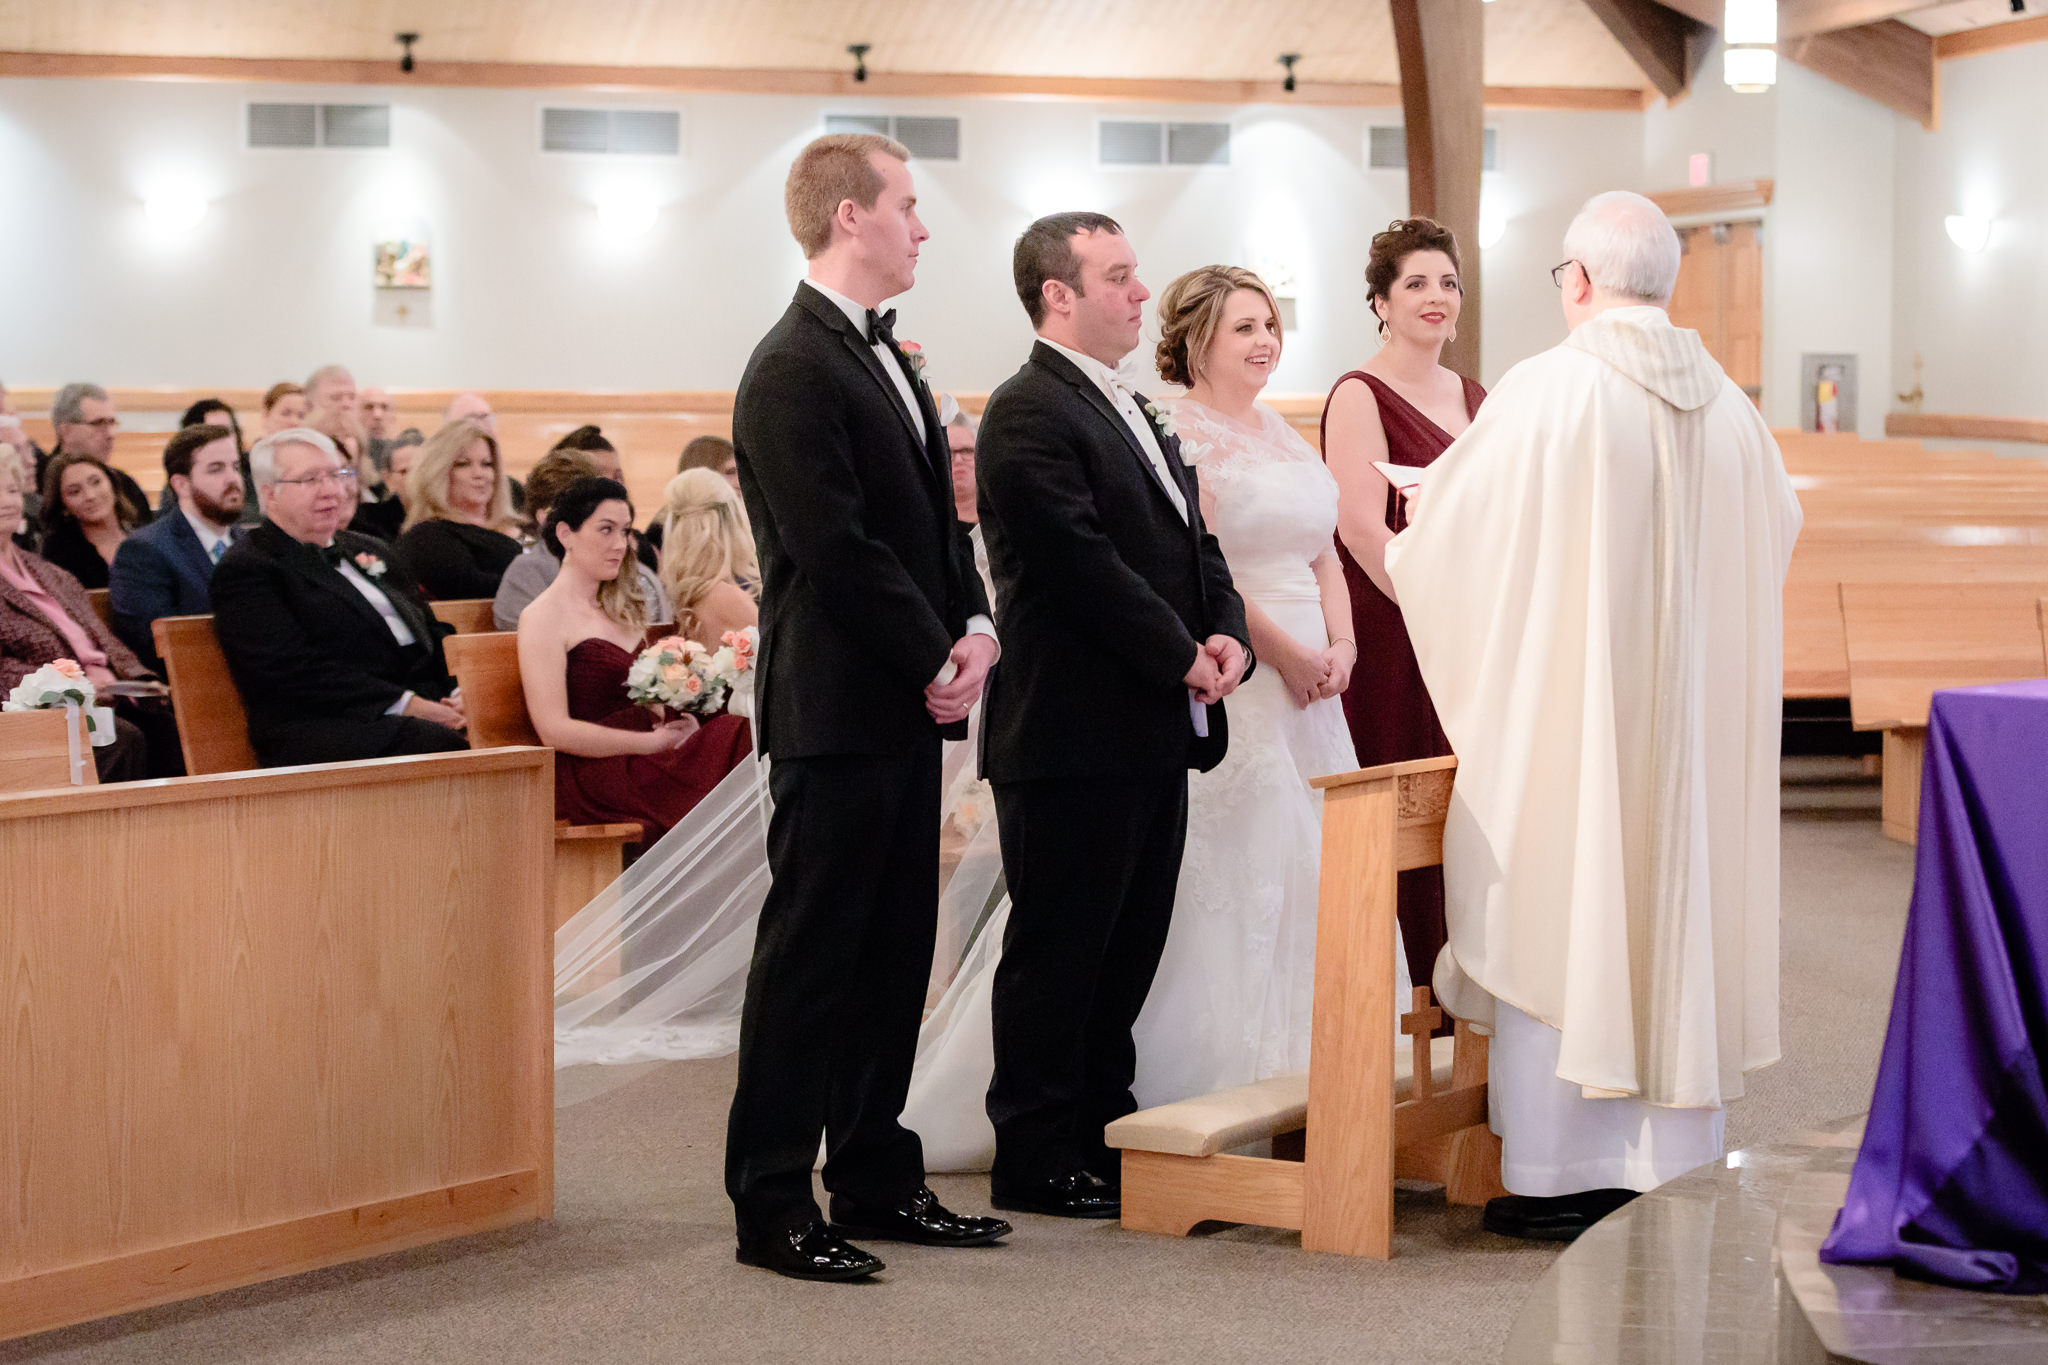 Marriage ceremony at Mother of Sorrows Church in Murrysville, PA